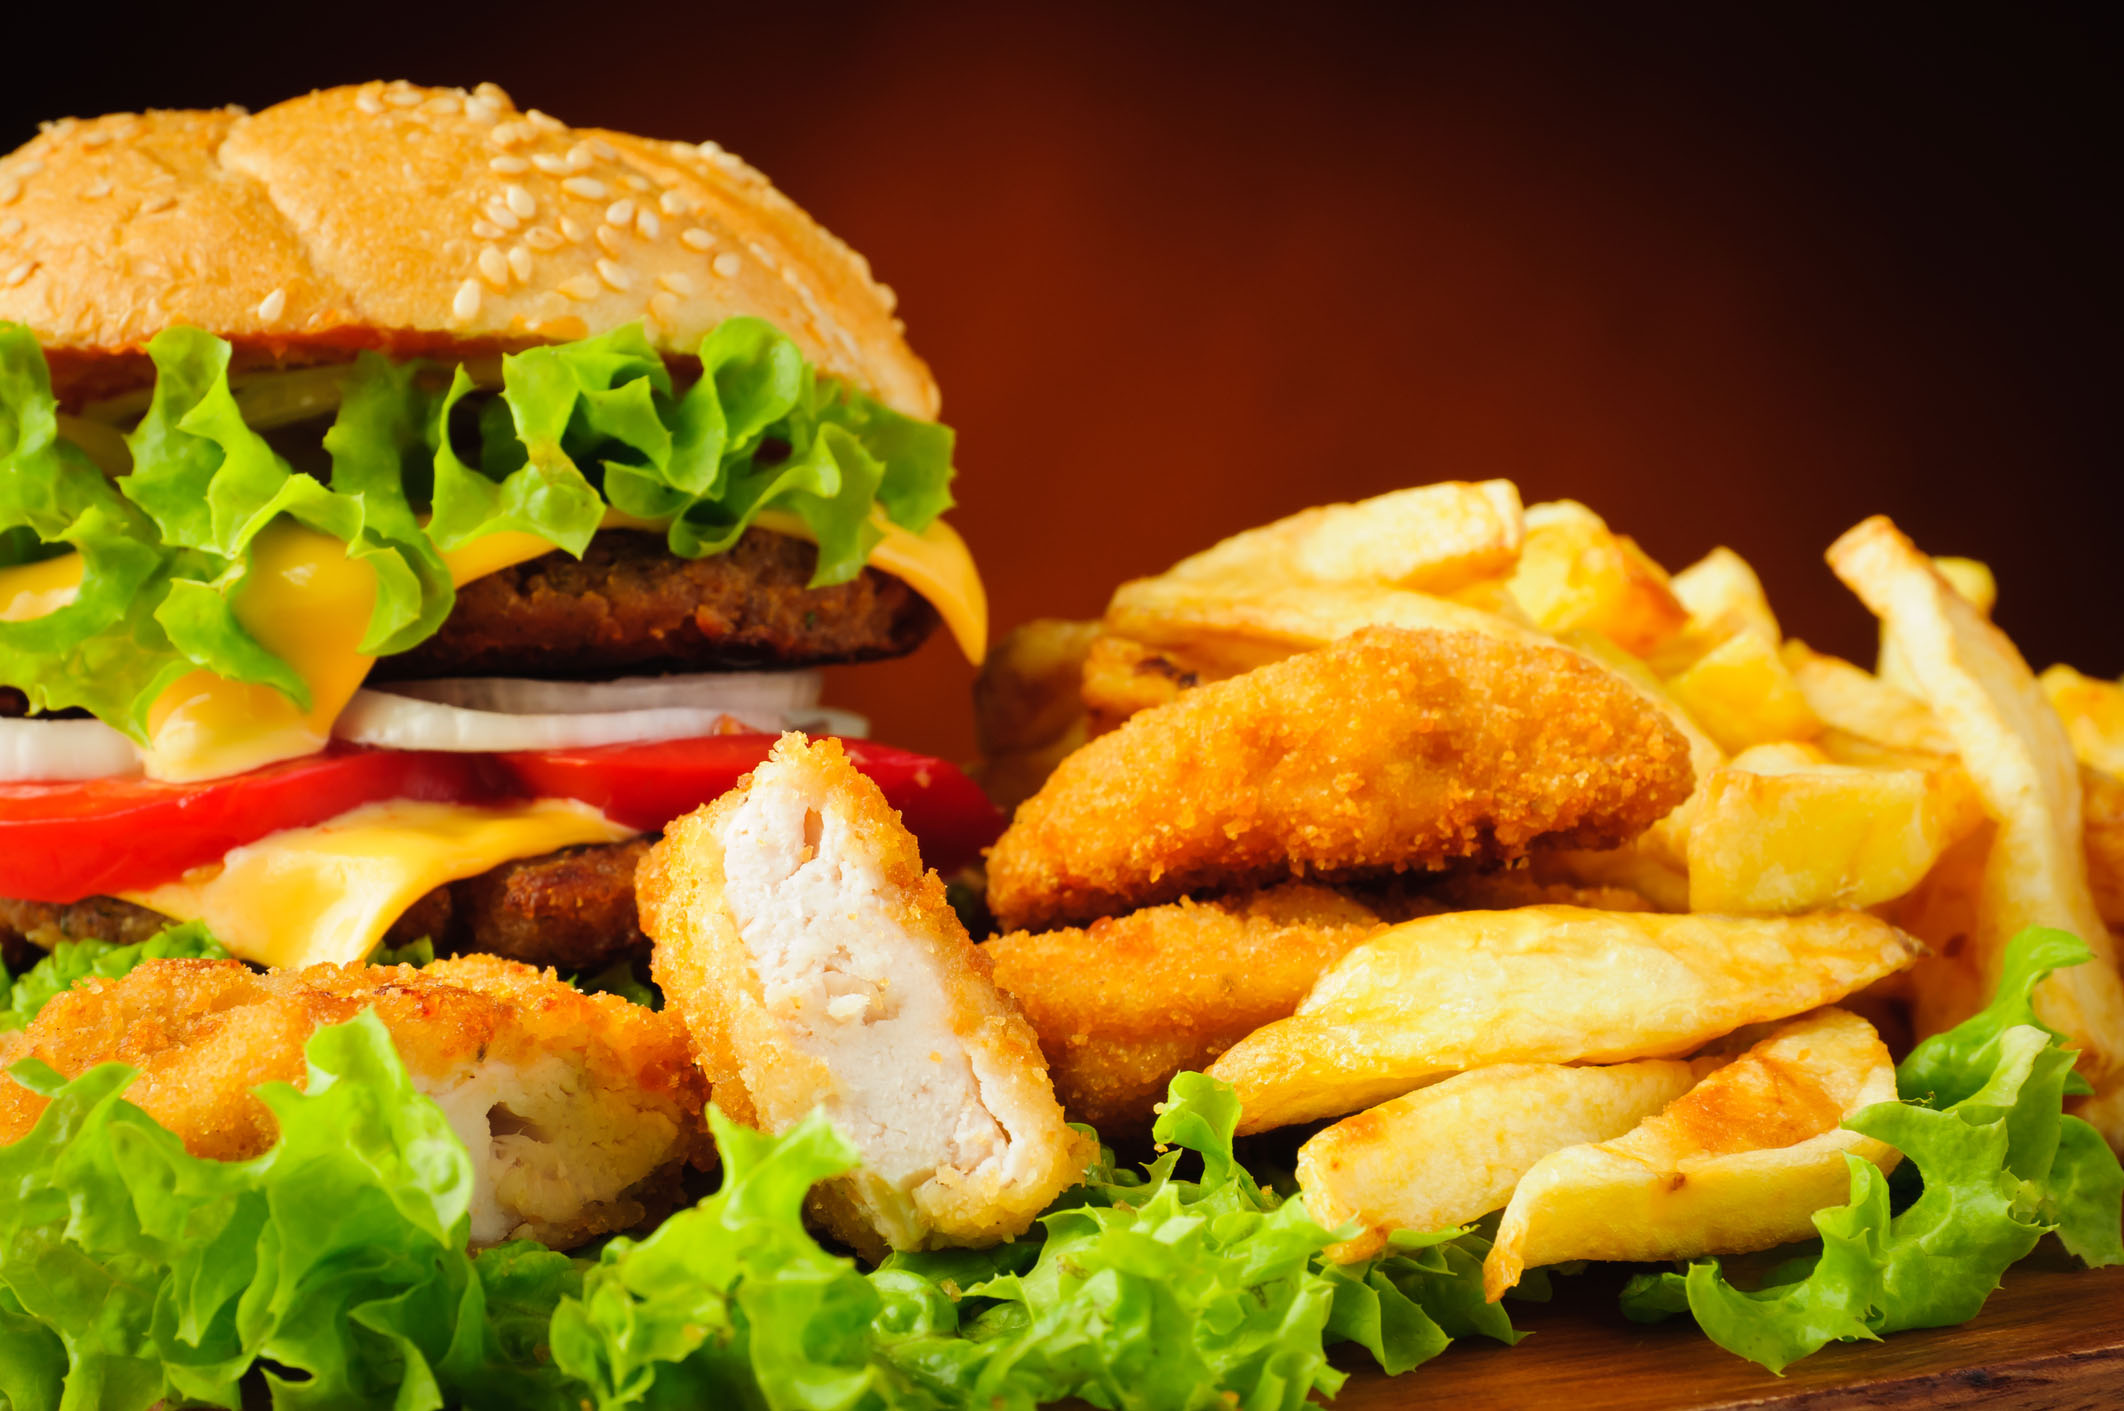 Fast Food Backgrounds, Compatible - PC, Mobile, Gadgets| 2124x1411 px